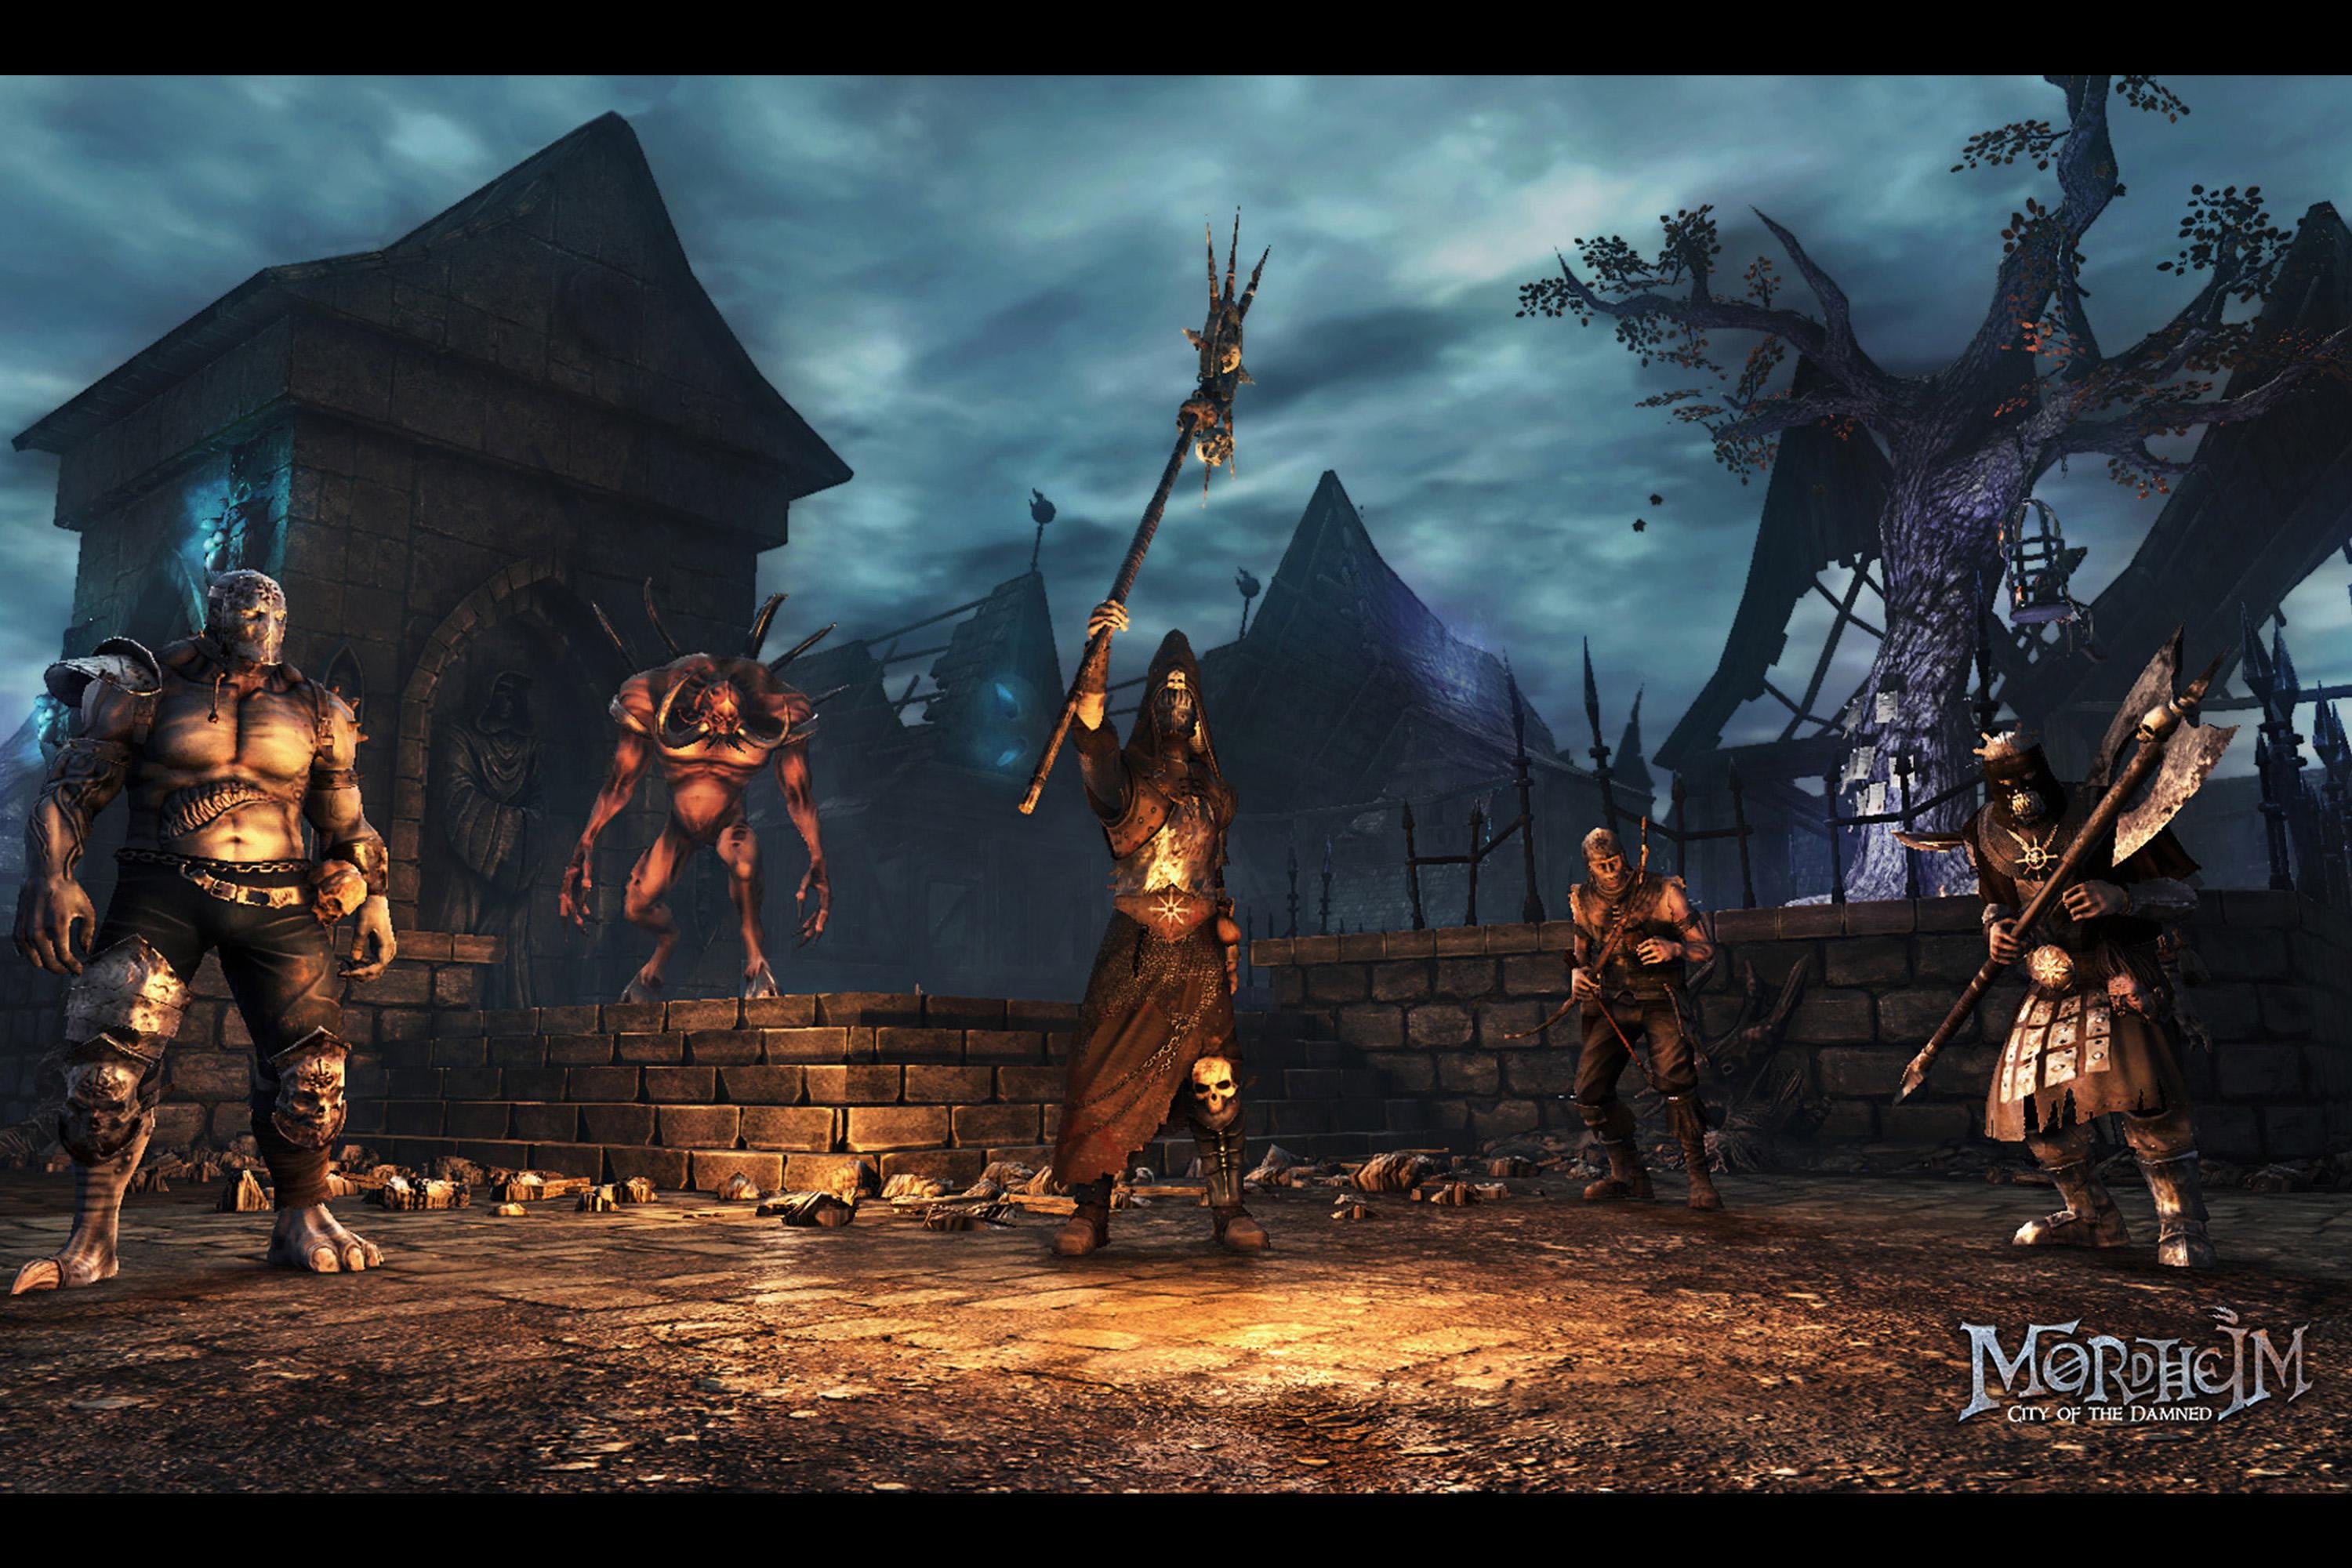 Mordheim: City of the Damned enters Early Access Phase 5 - Saving